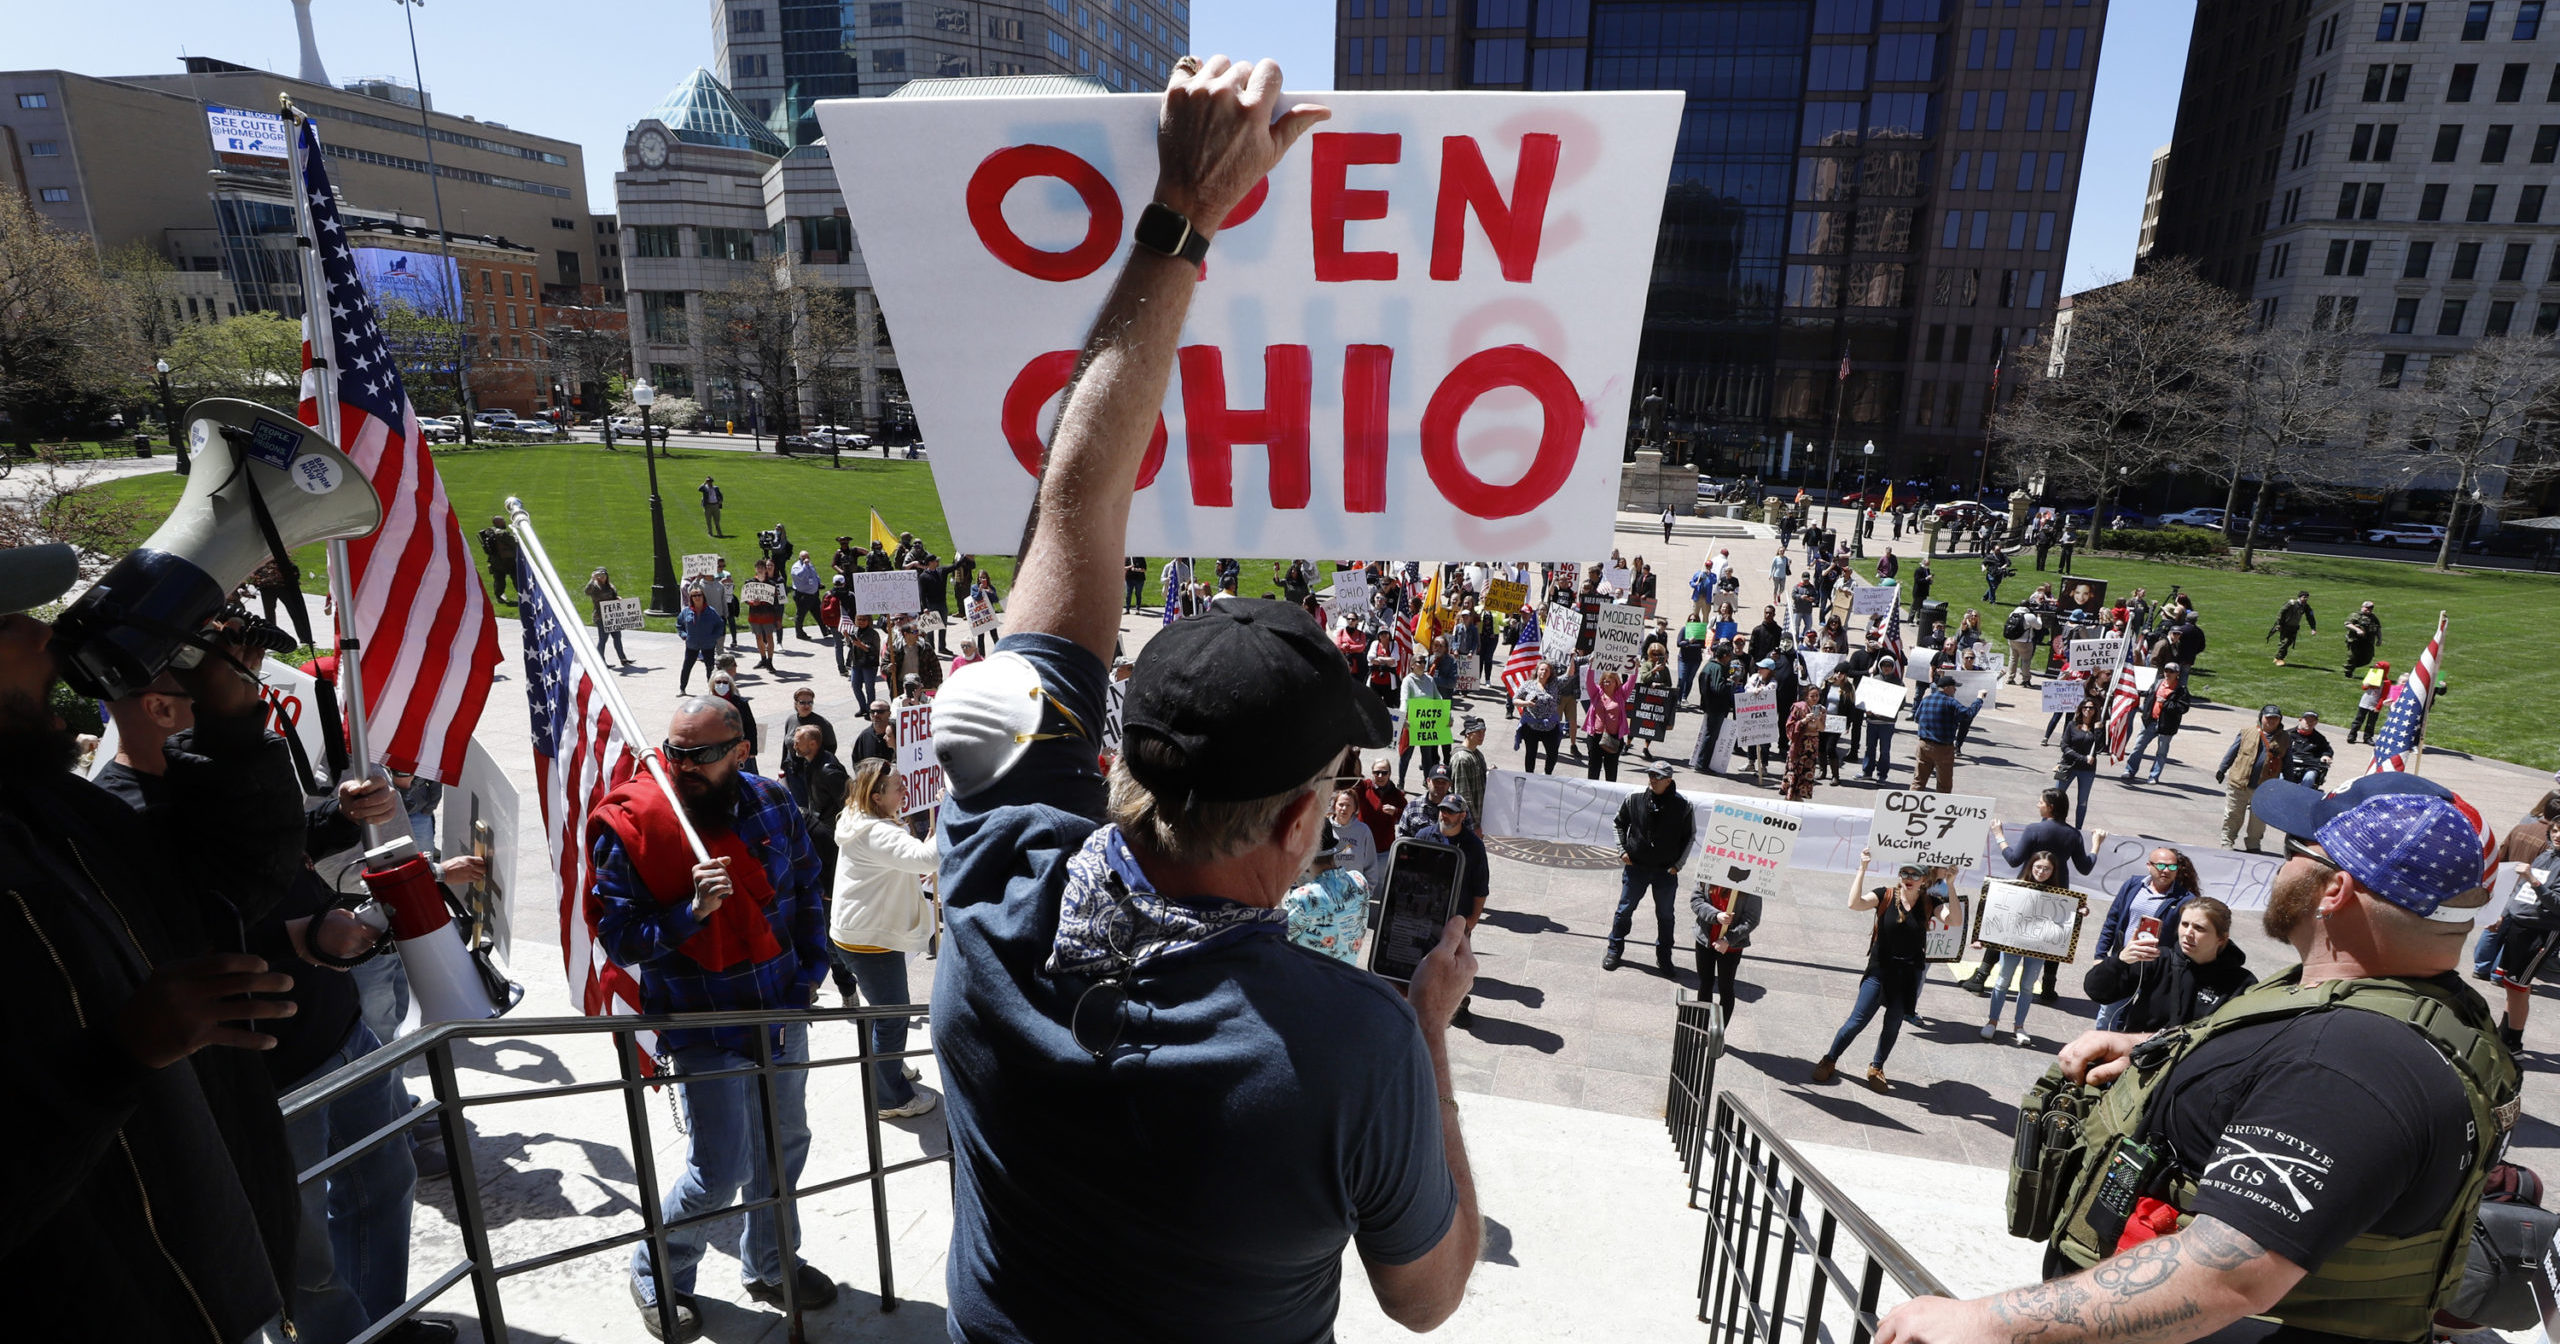 Protesters gather outside the Ohio Statehouse in Columbus, Ohio, to protest a stay-at-home order on Apr. 20, 2020.